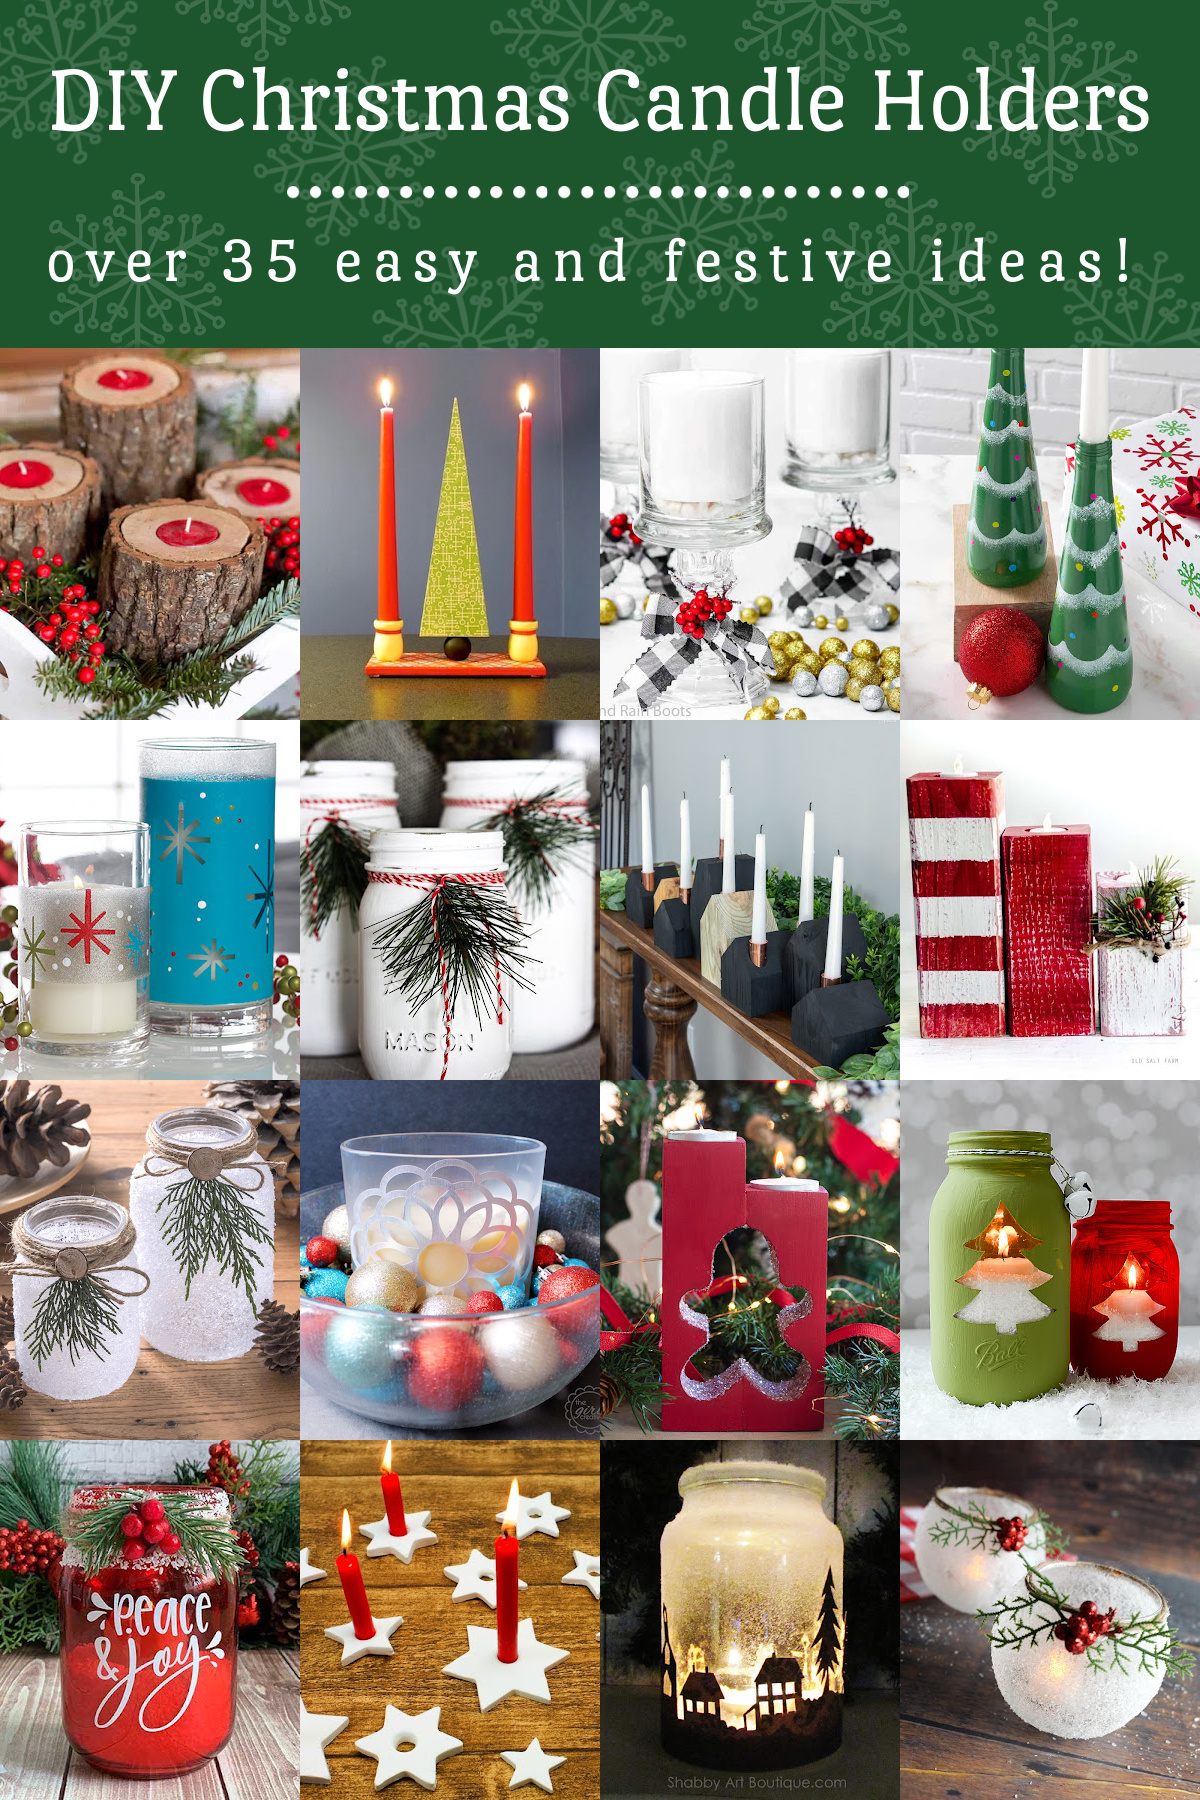 Create Festive Frosted Candle Holders in 2 Easy Steps